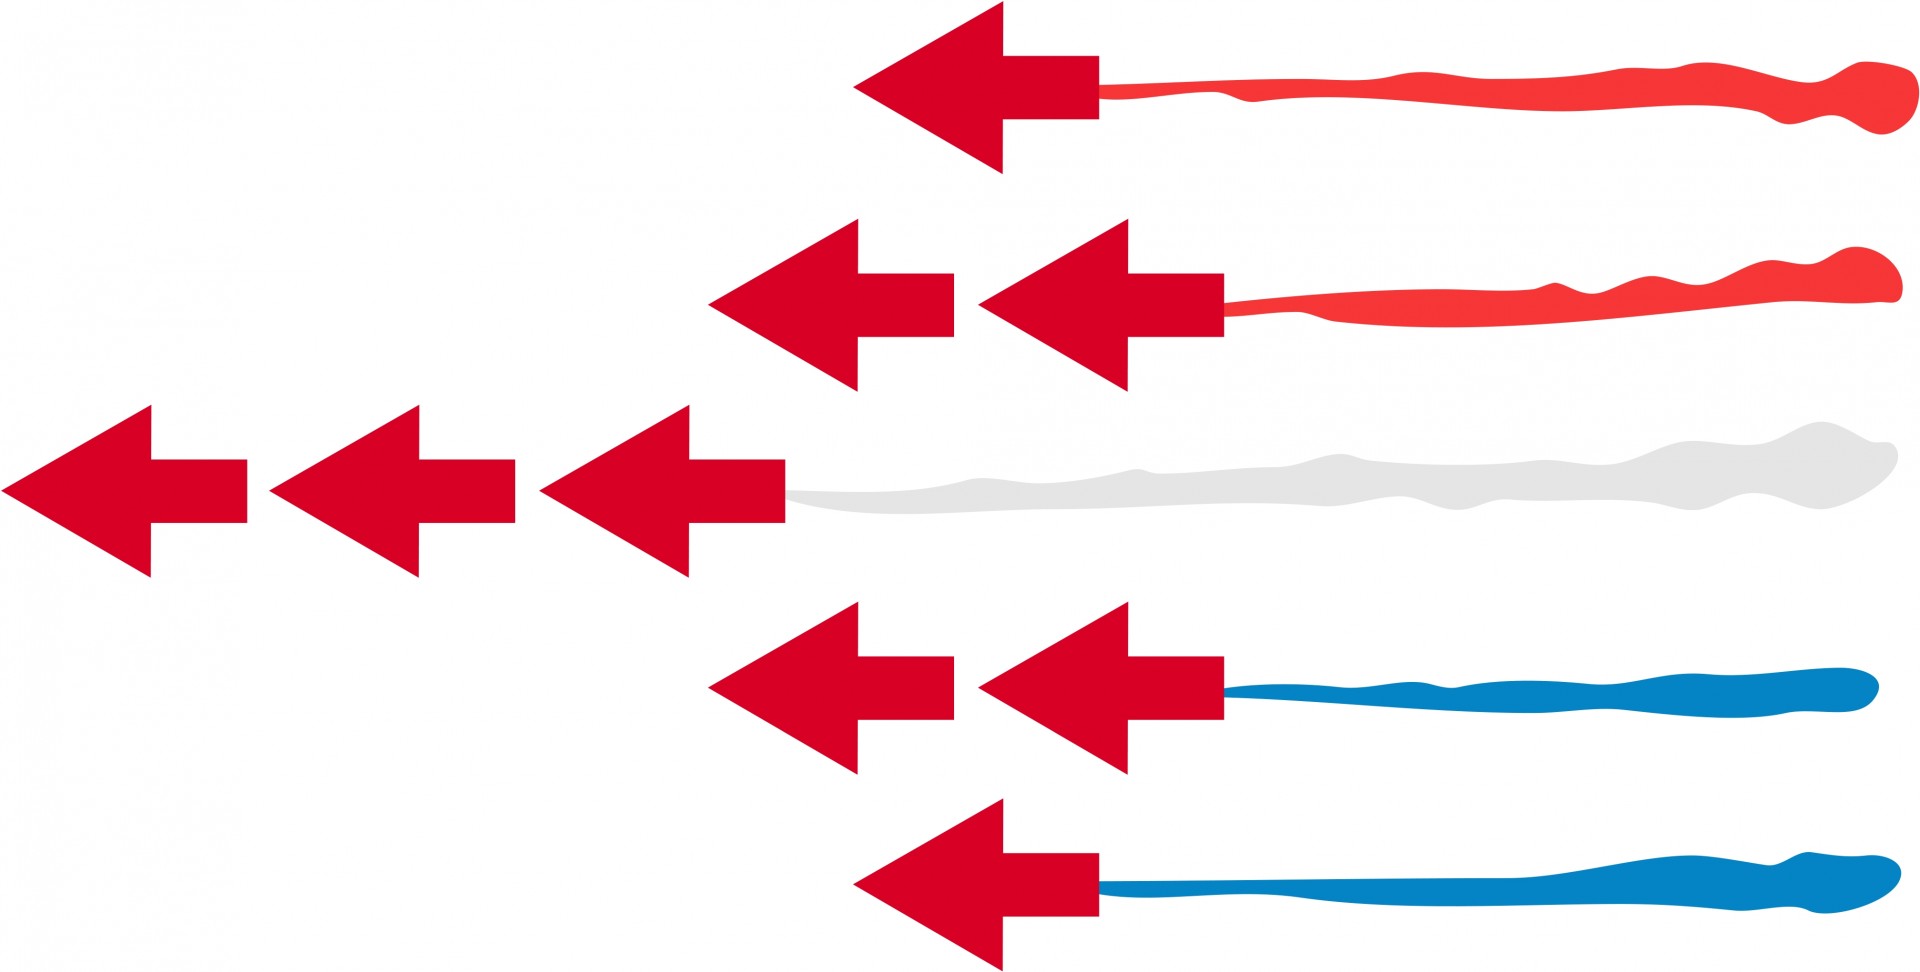 The red arrows in formation clipart illustration.